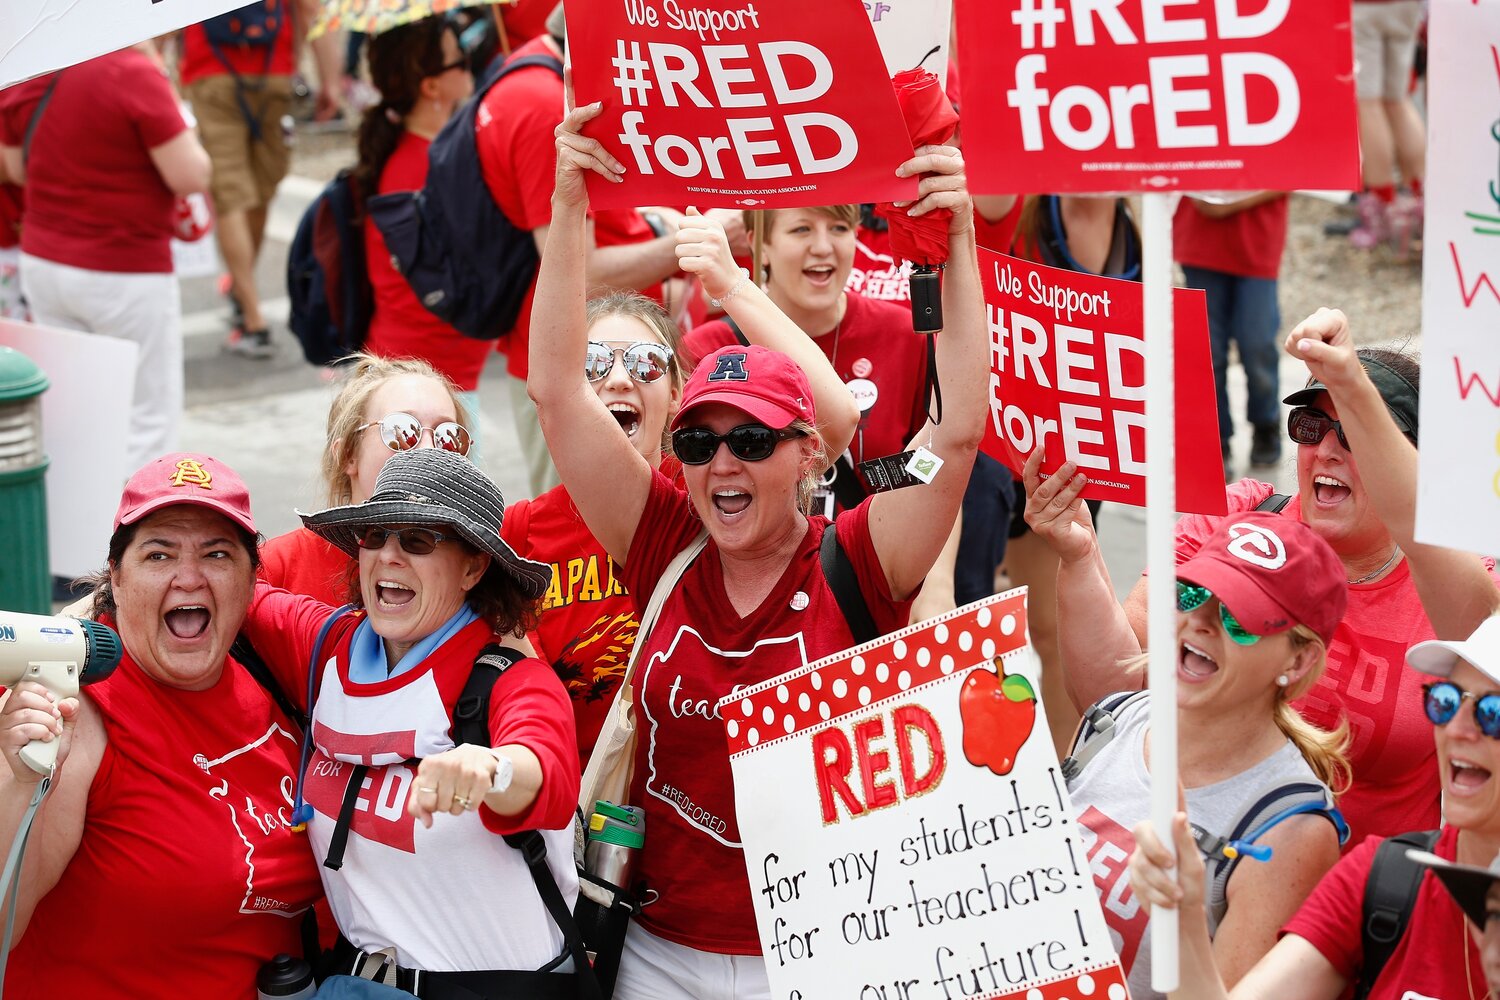 Arizona teachers rallied at the state Capitol in Phoenix for higher teacher pay and school funding April 26, 2018, the first day of a statewide teachers strike.